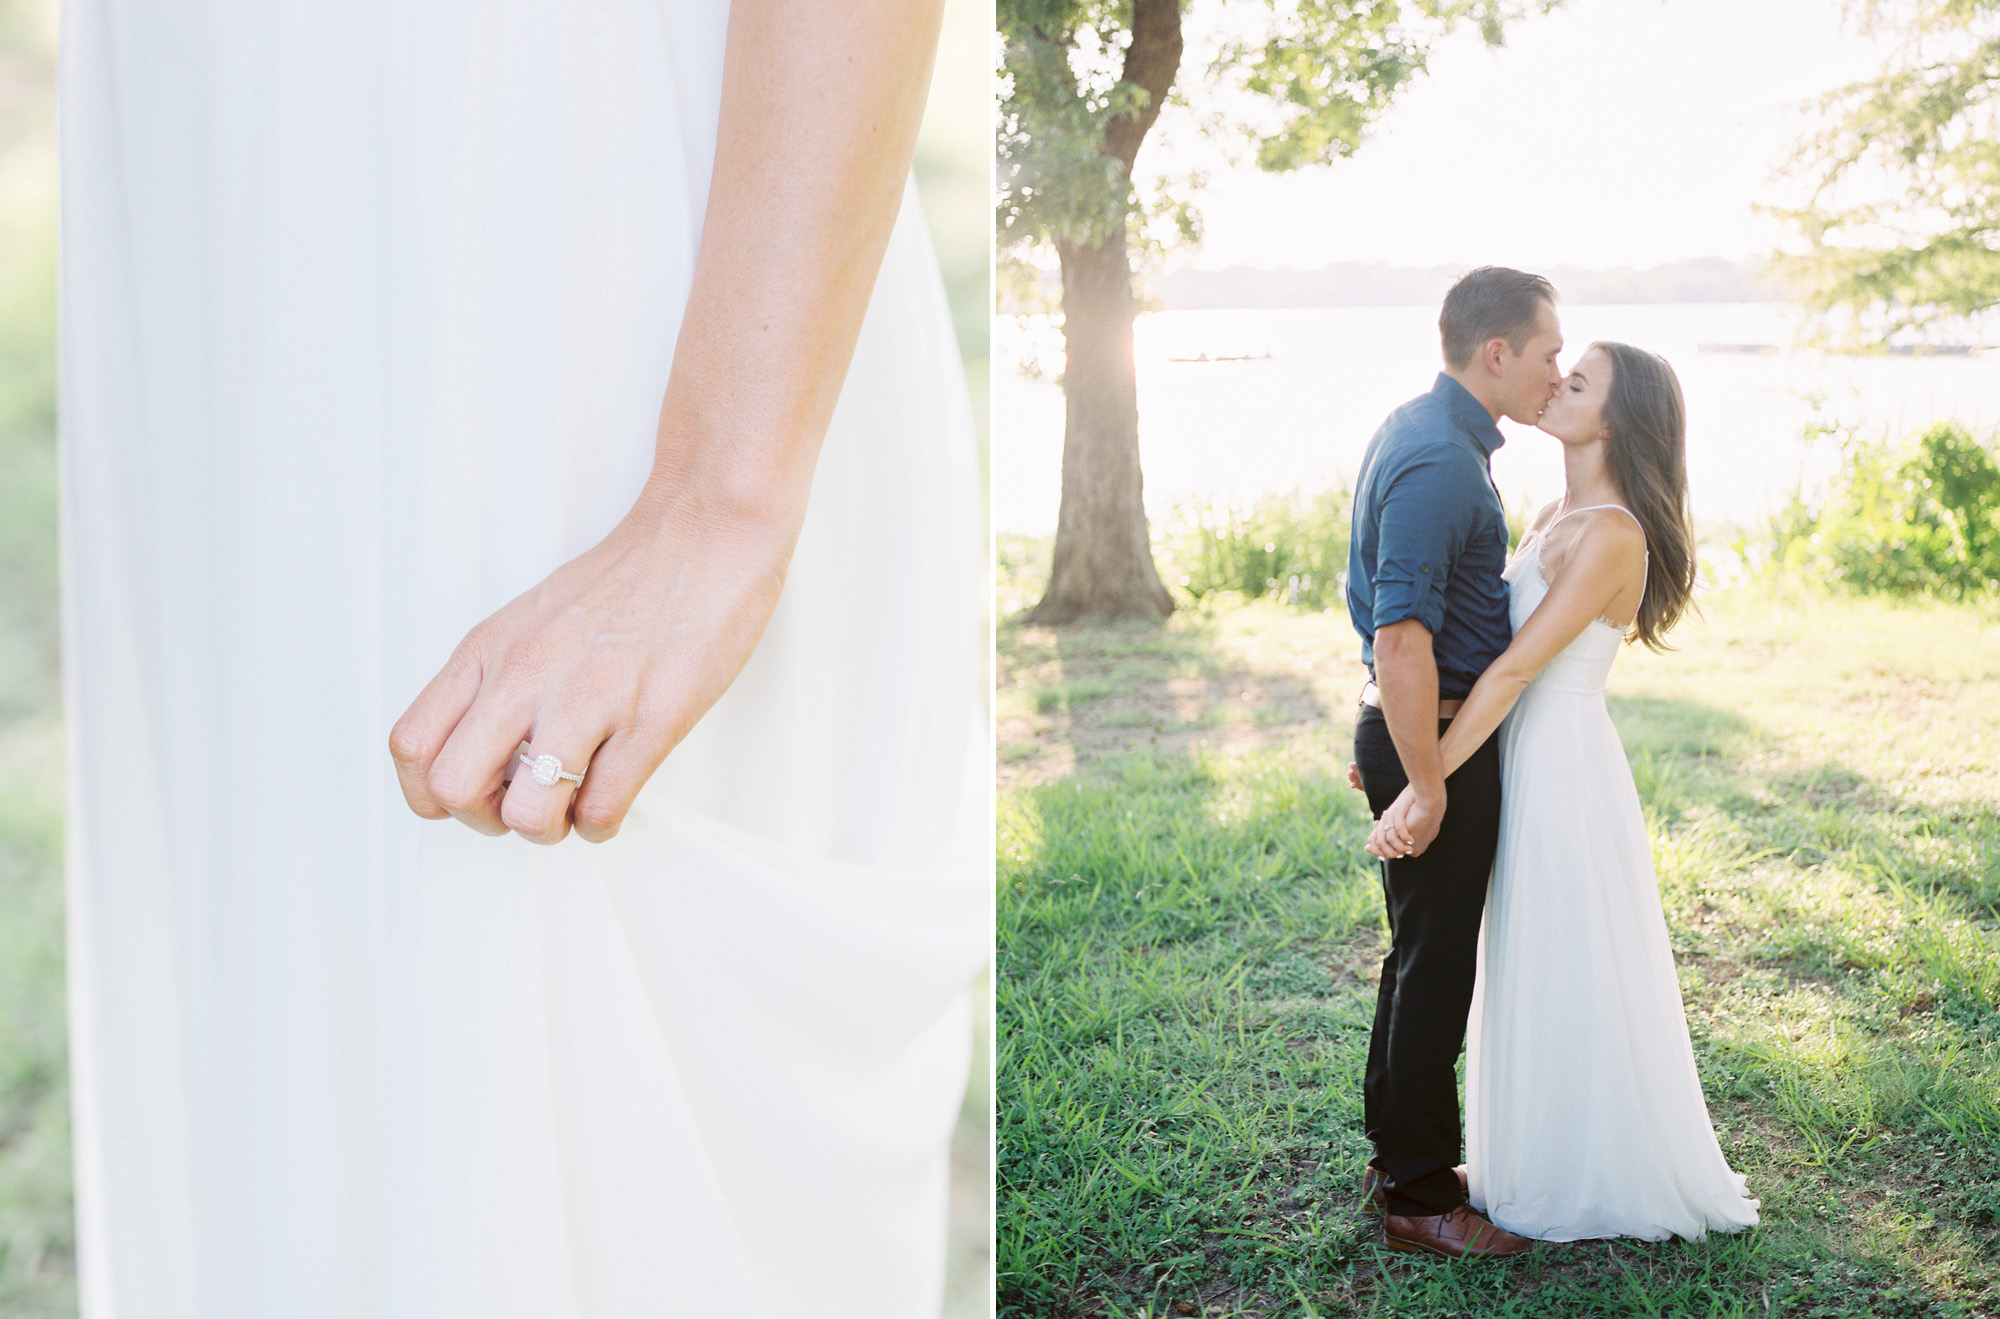 Delicate details captured on film during this White Rock Lake engagement session.